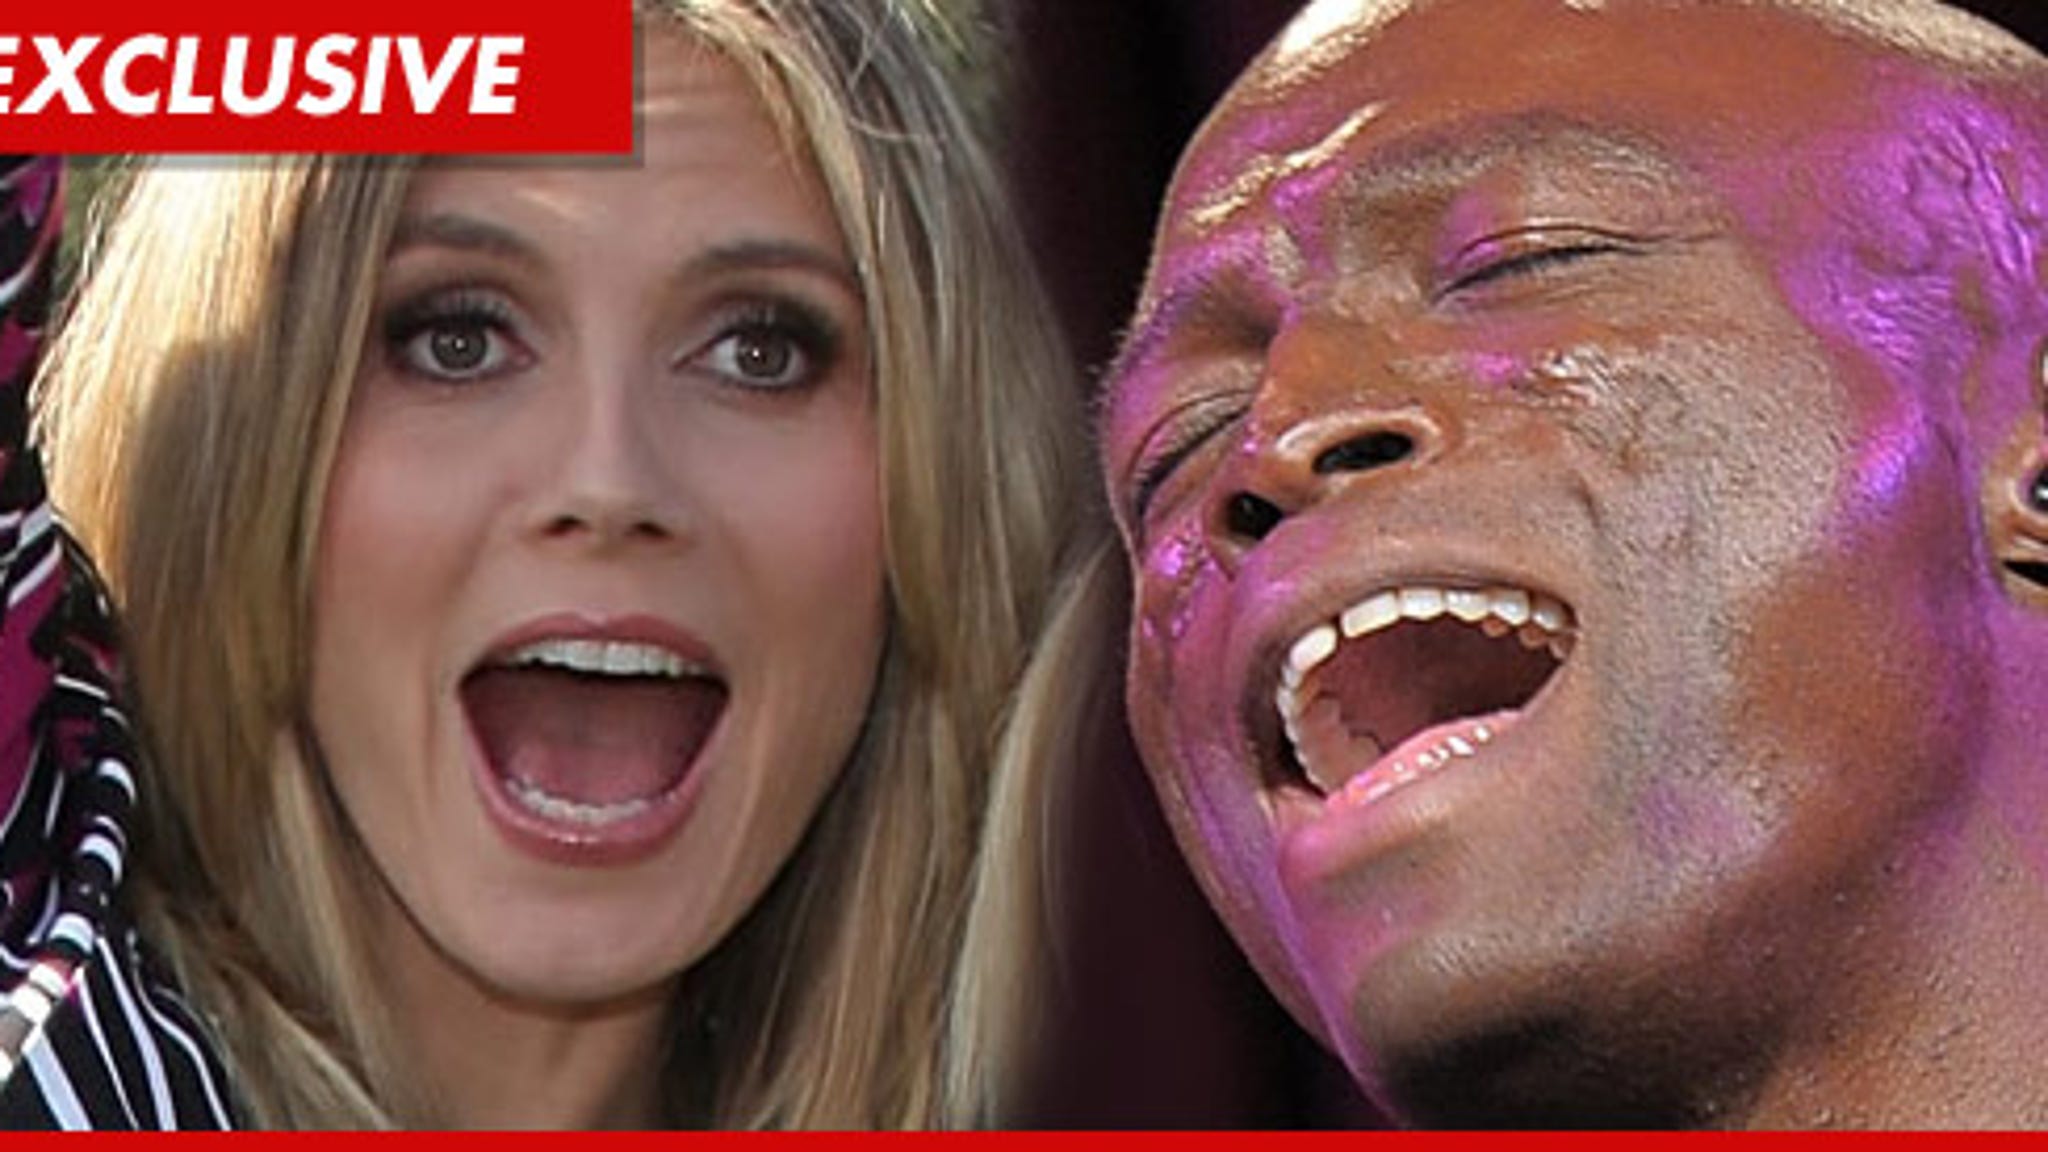 Heidi Klum To File For Divorce From Seal